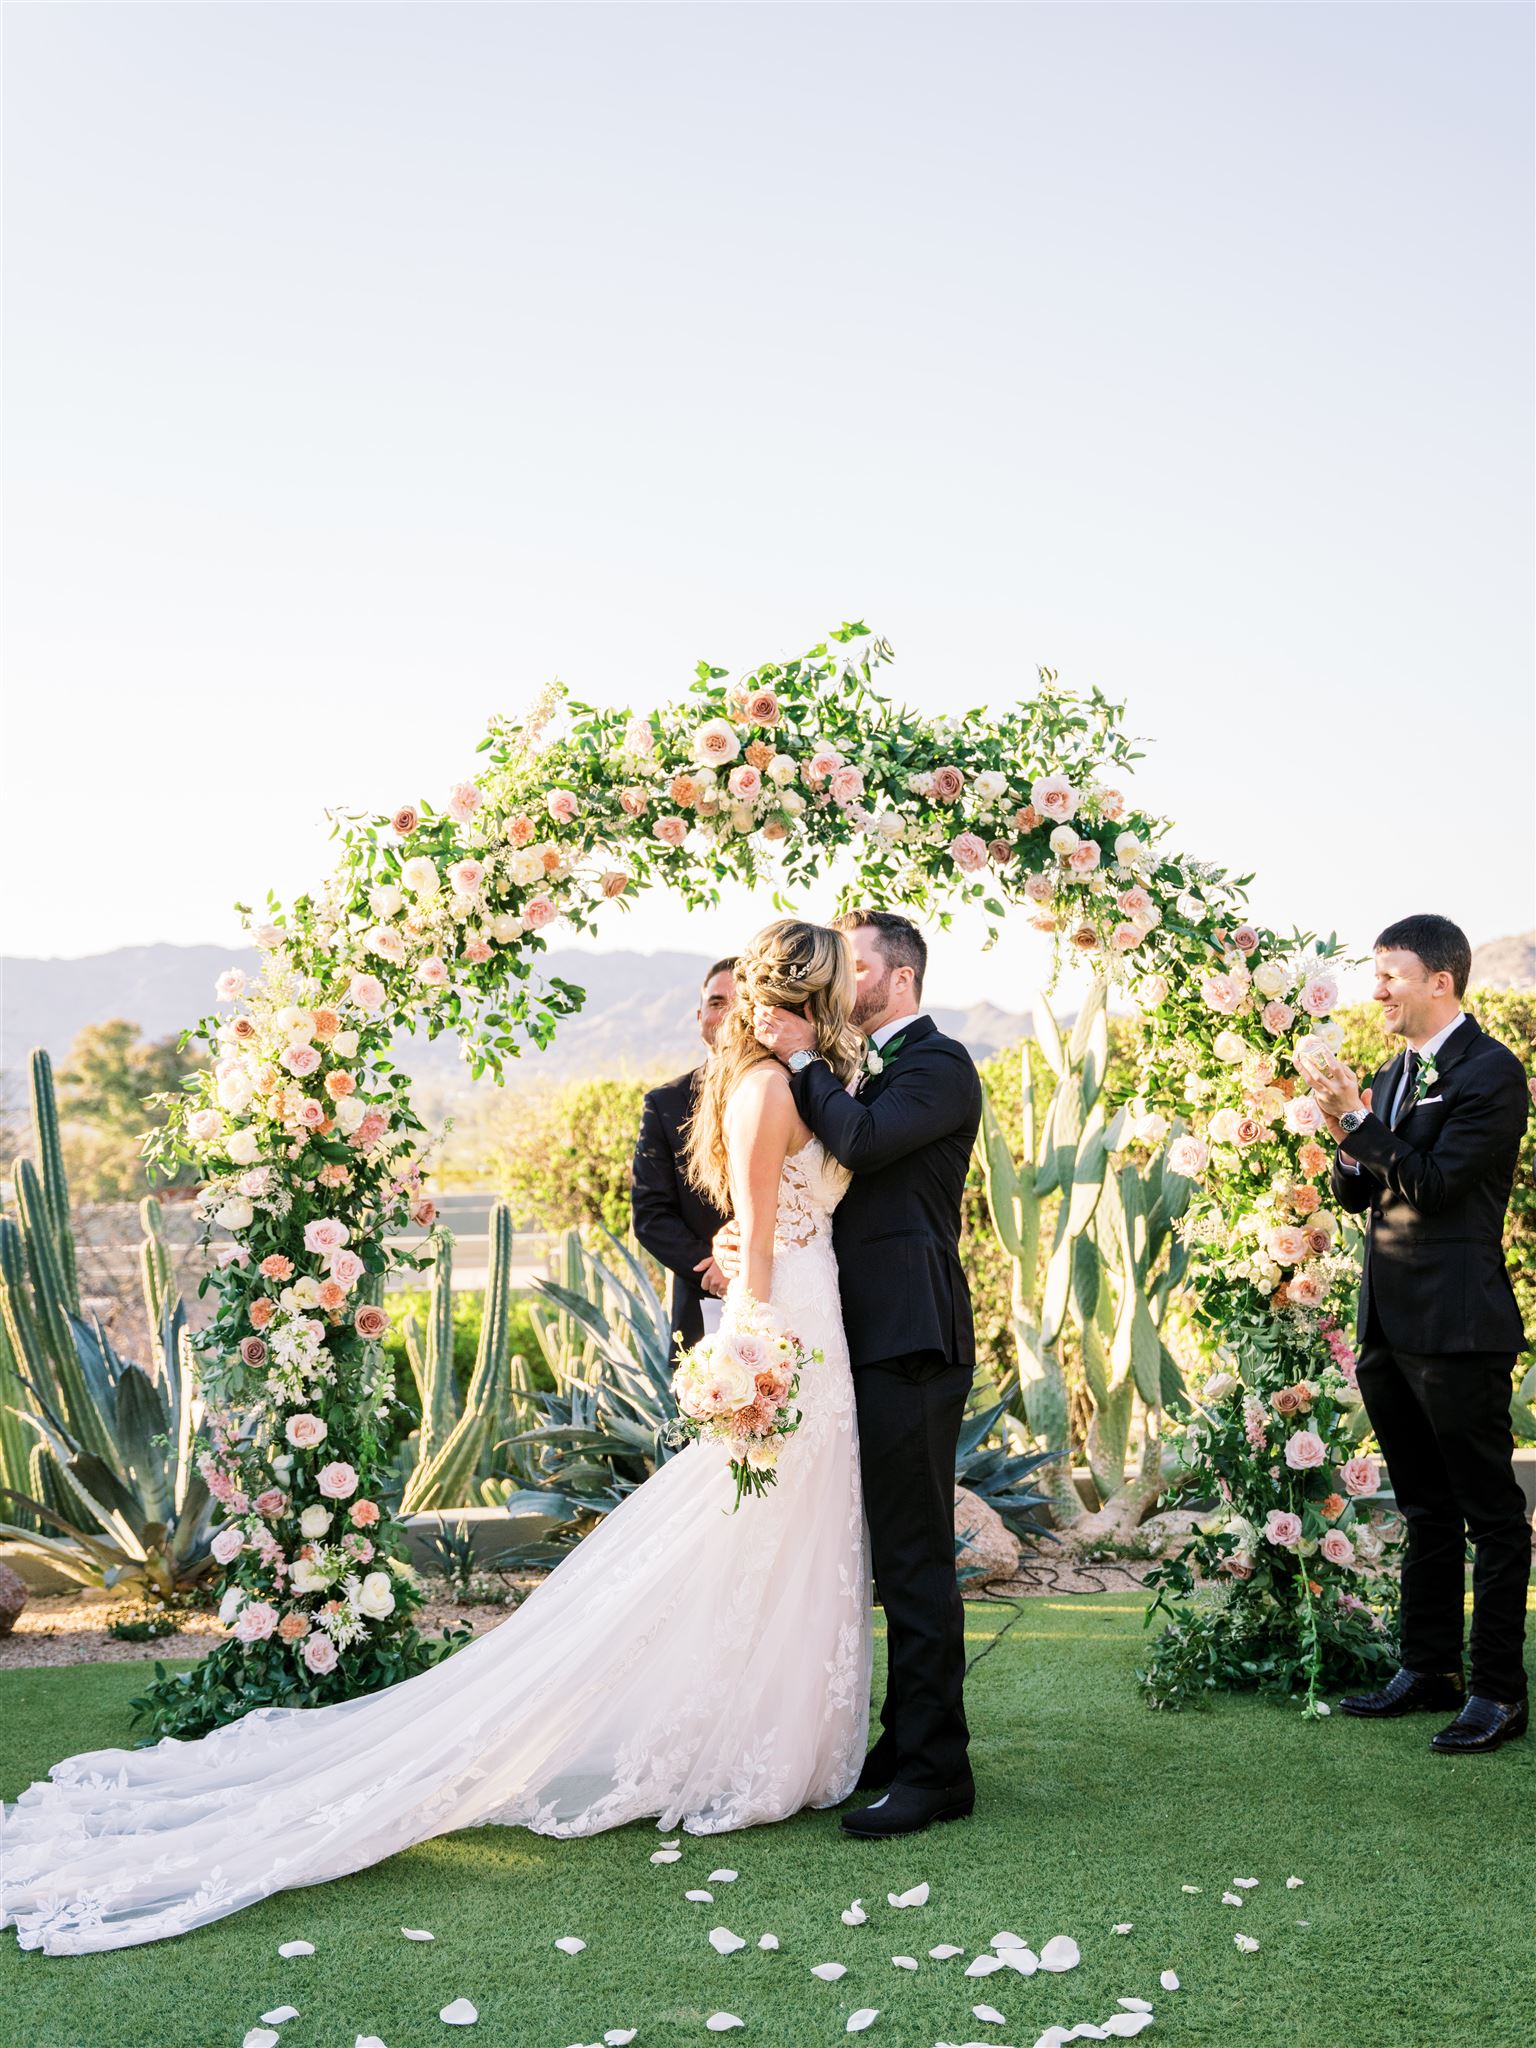 Bride and groom kissing under wedding ceremony arch of greenery and white and pink roses.